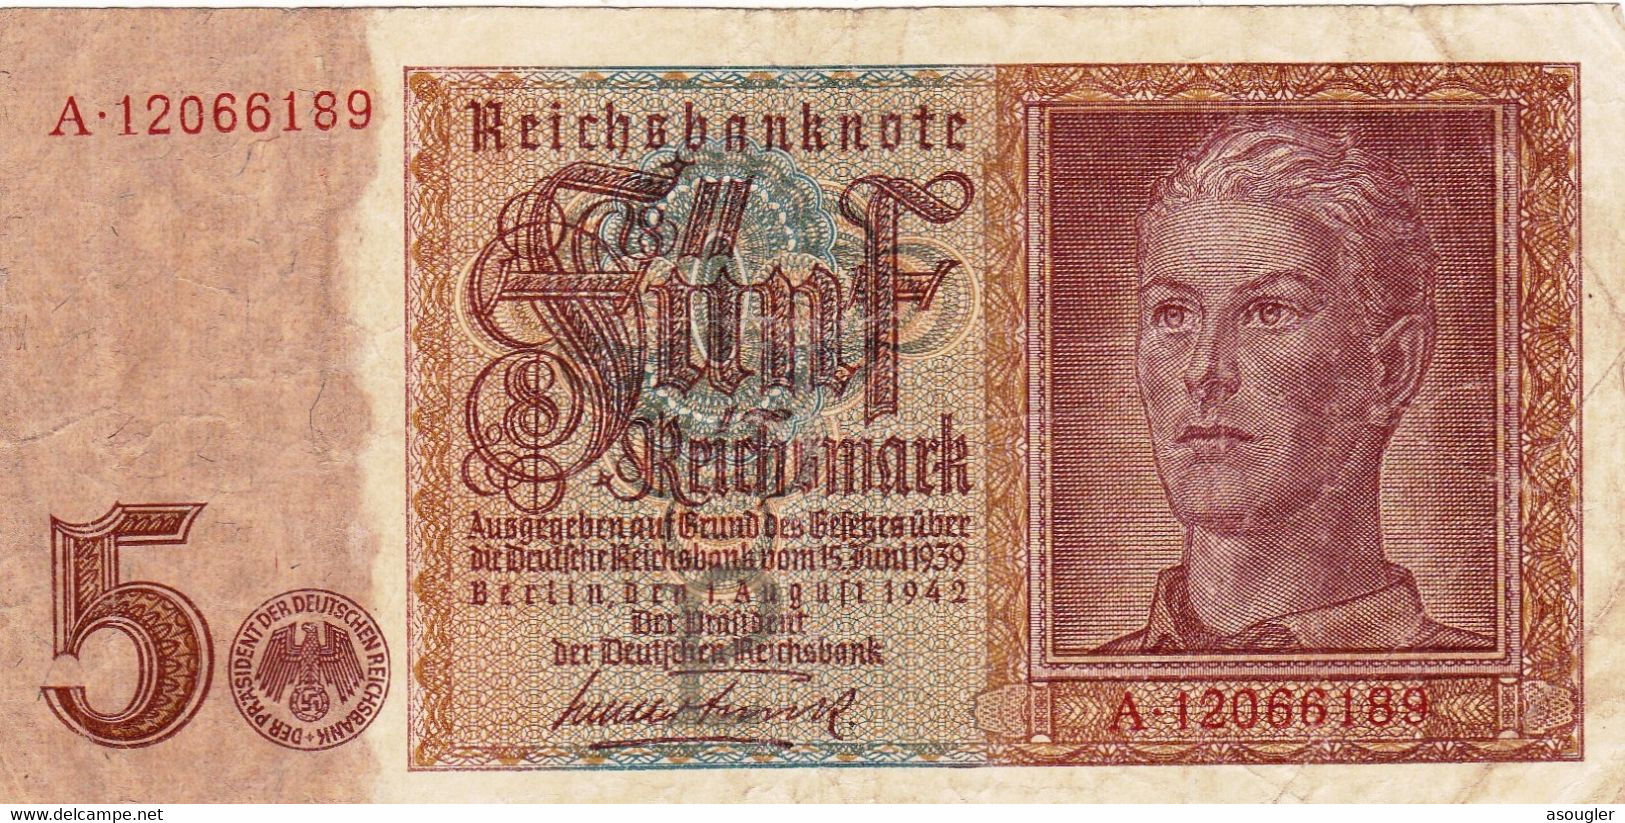 GERMANY 5 Reichs Mark (1939) 1942 F-VF P-186a "free Shipping Via Registered Air Mail) - 5 Reichsmark